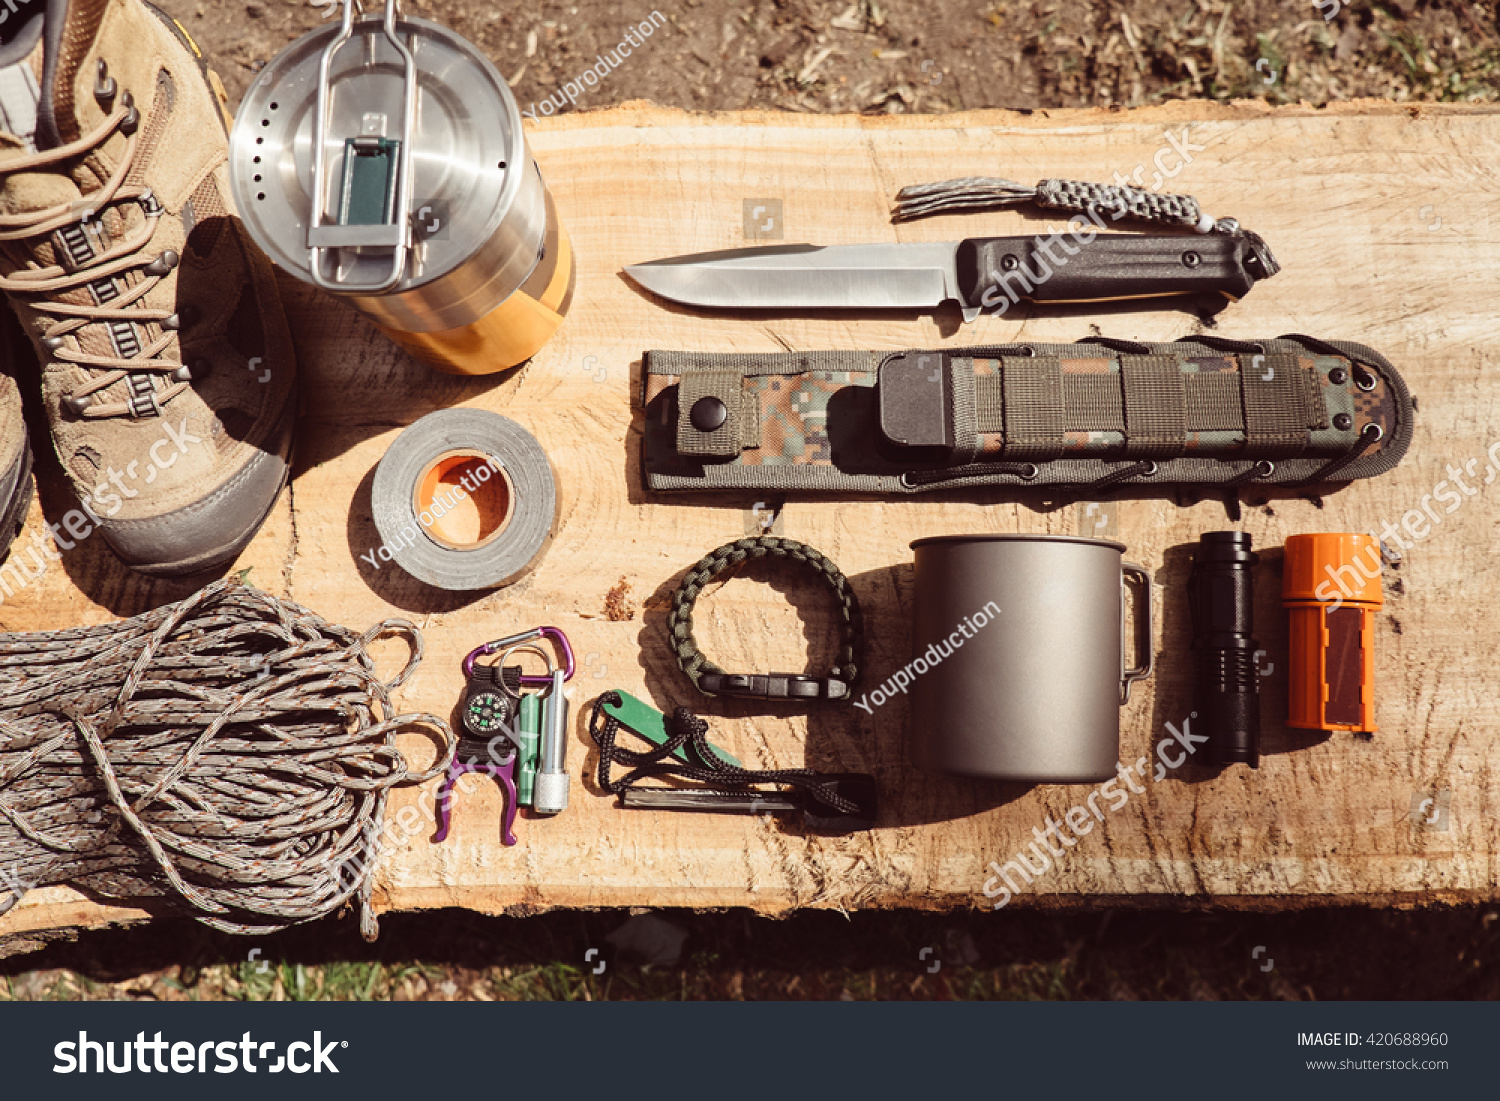 Overhead top view of hiking travel gear on wood log. Items include hiking boots, cup, rope, knife, matches, flashlight, compass. Flat lay of outdoor travel equipment items for mountain camping trip. #420688960